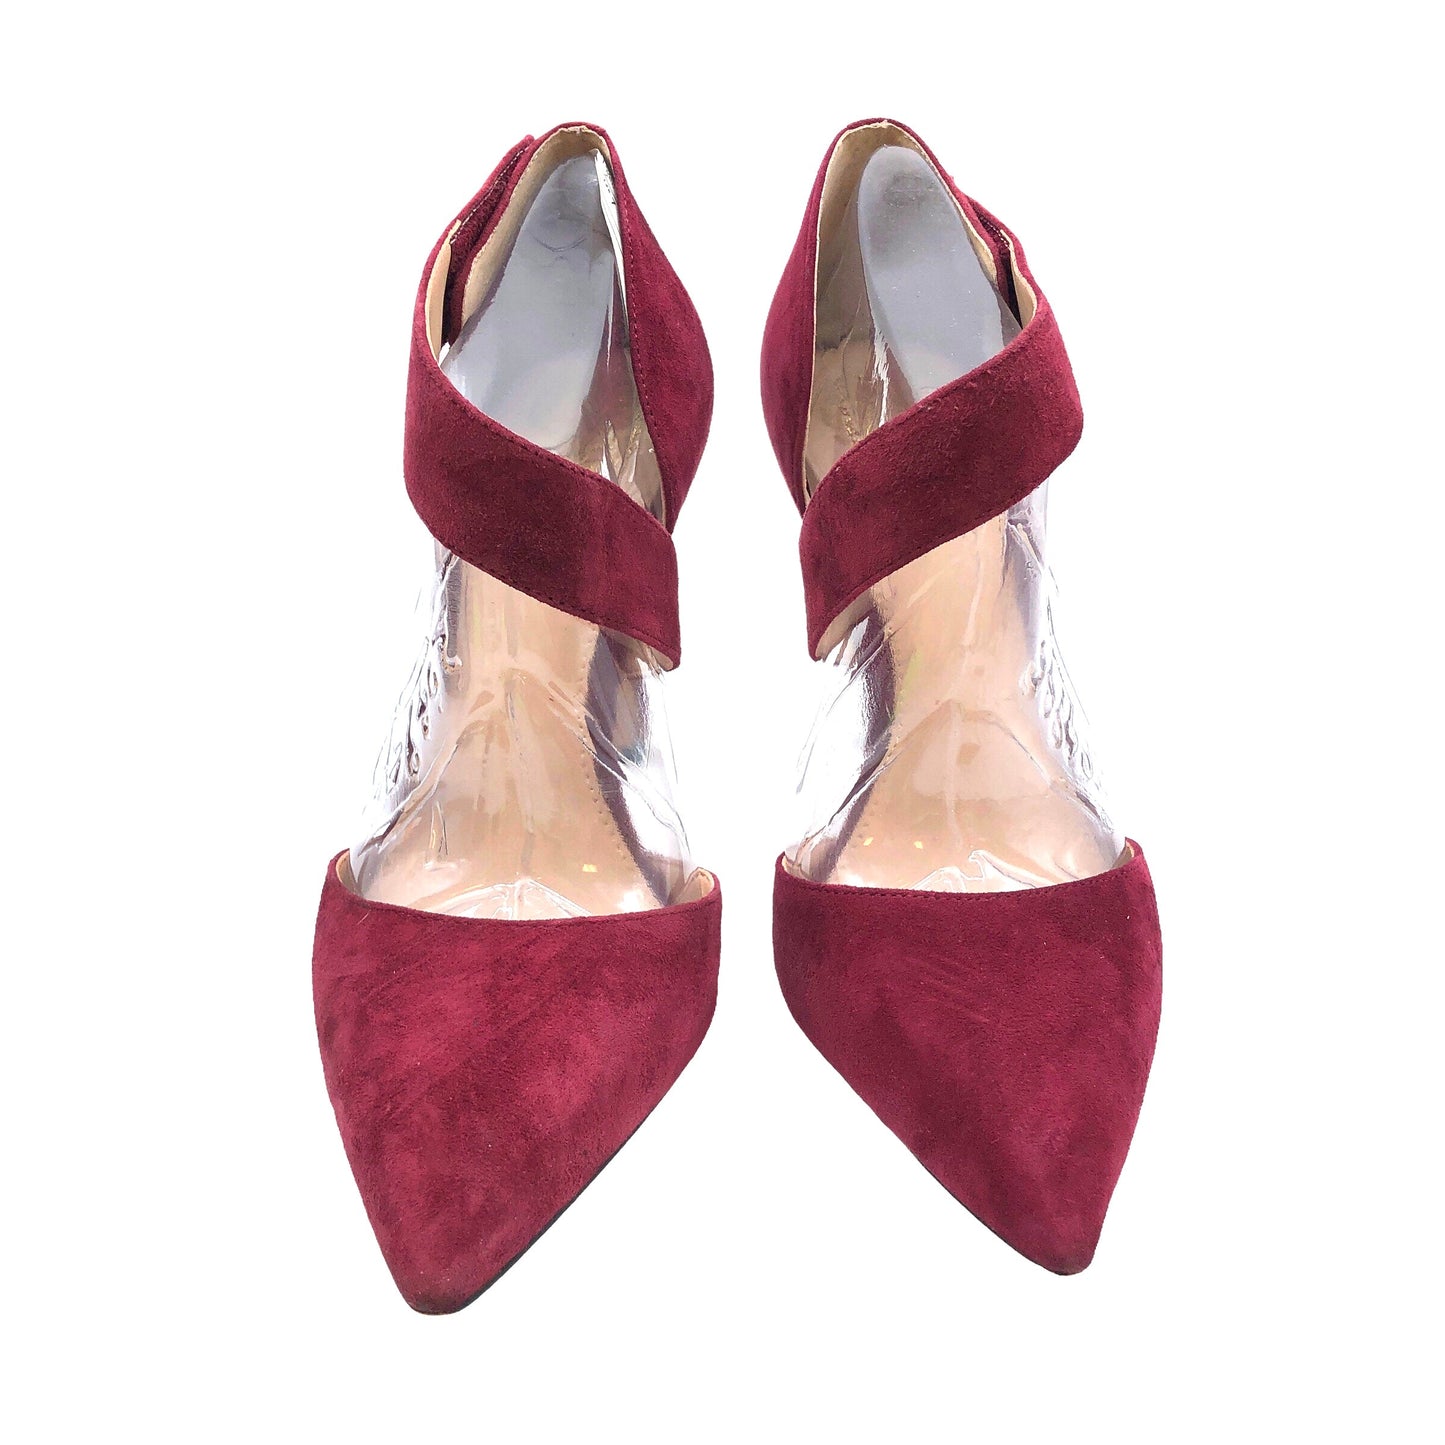 Red Shoes Heels Stiletto Vince Camuto, Size 7